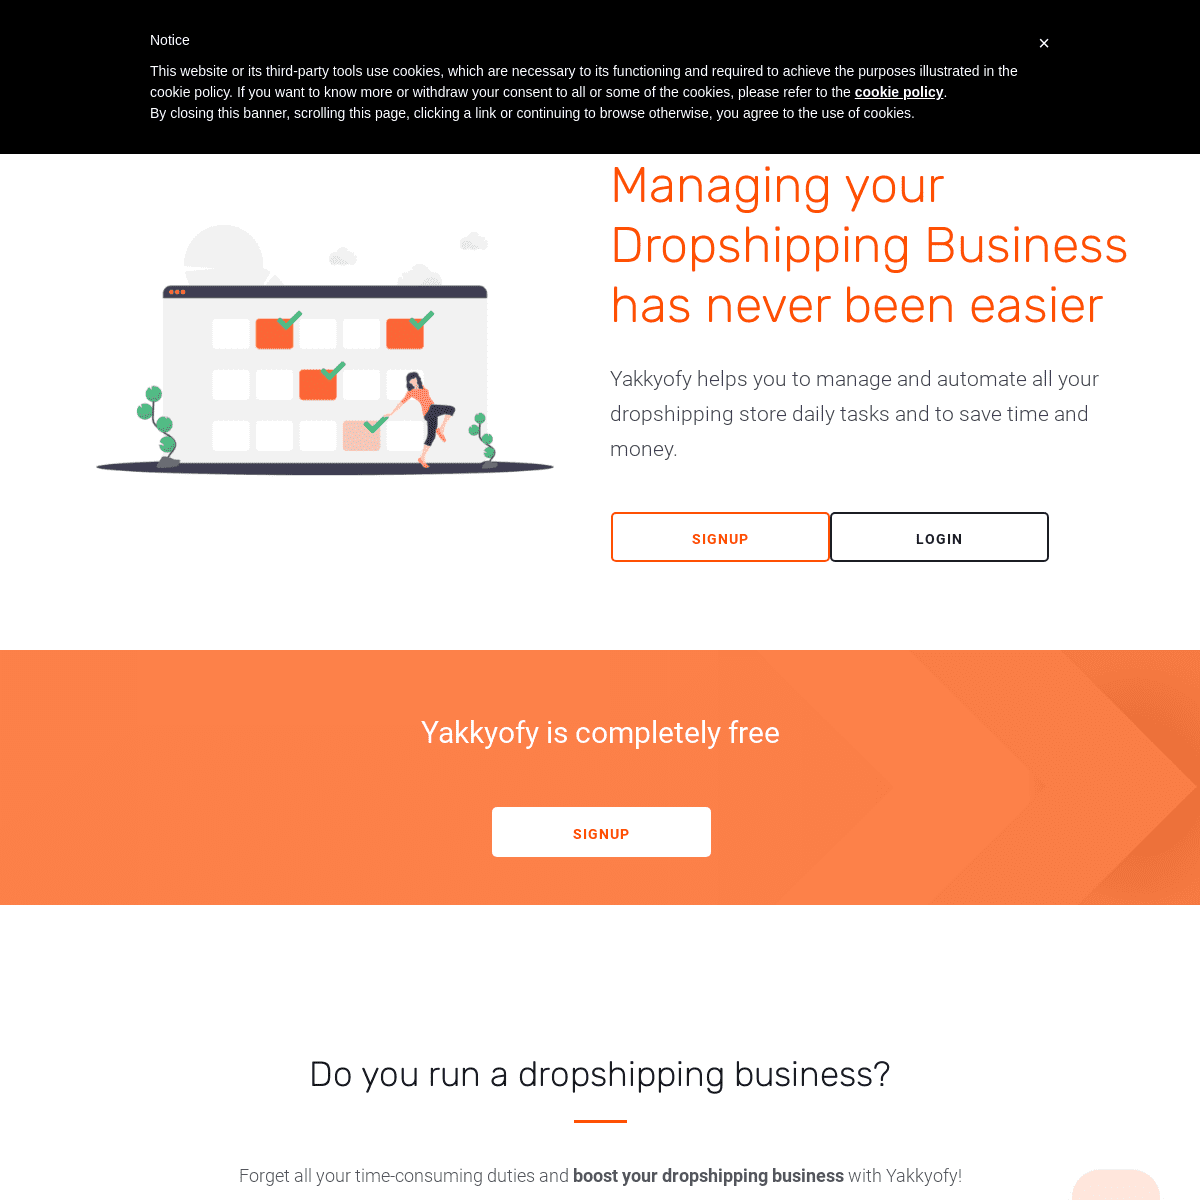 Manage your Dropshipping Business has never been easier - Yakkyofy